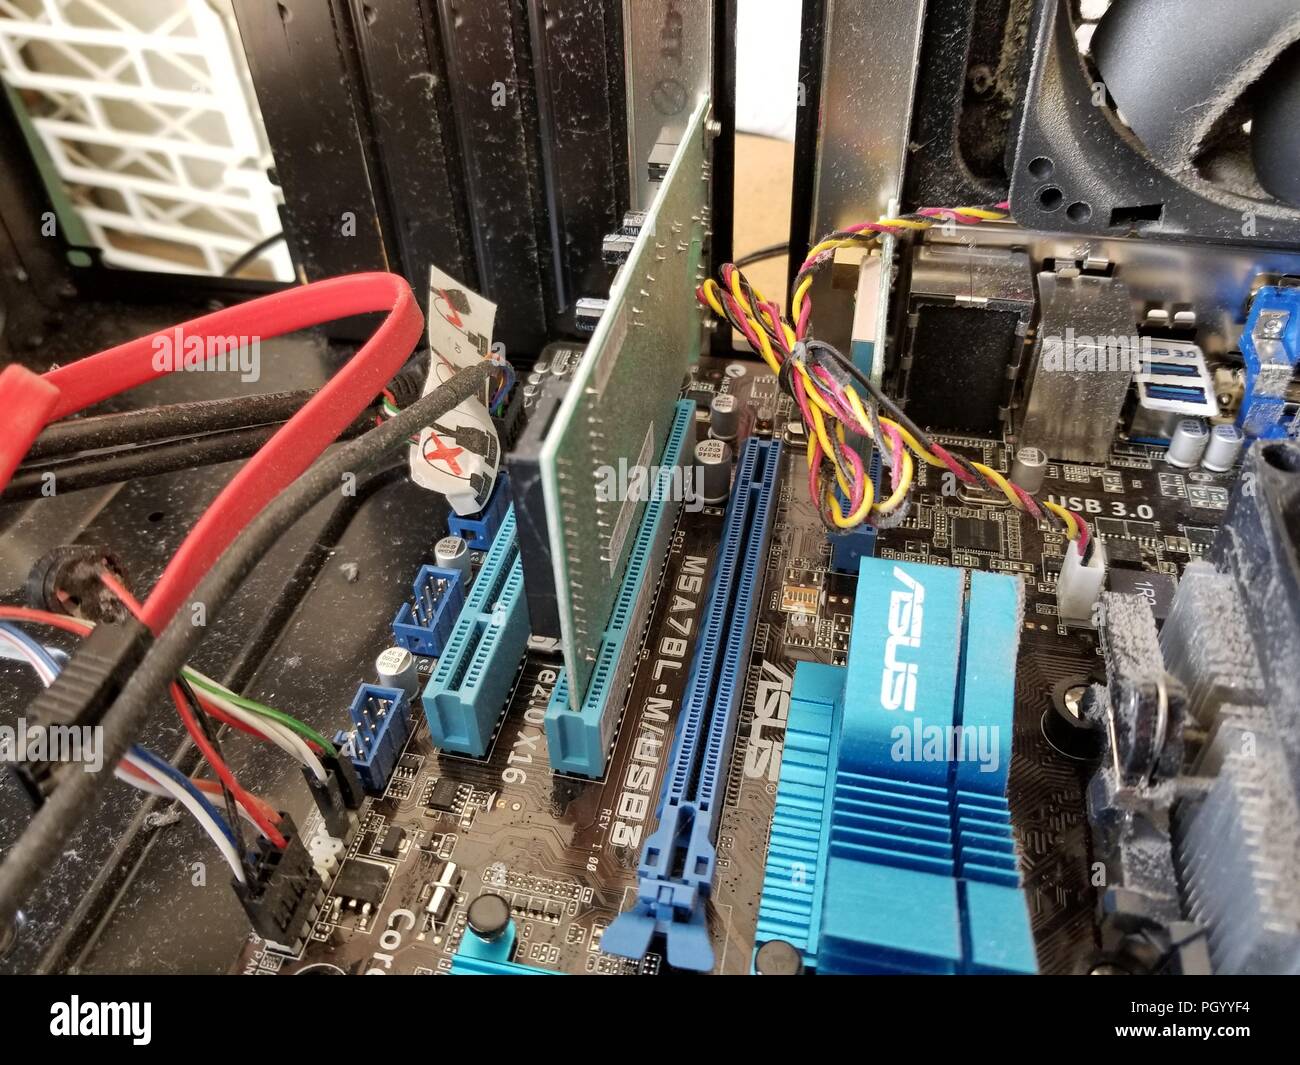 Interior of desktop computer being modified to add a high-powered PCI-E Graphical Processing Unit (GPU) in order to allow the computer to mine Bitcoin alternative cryptocurrencies, San Ramon, California, August 23, 2018. () Stock Photo